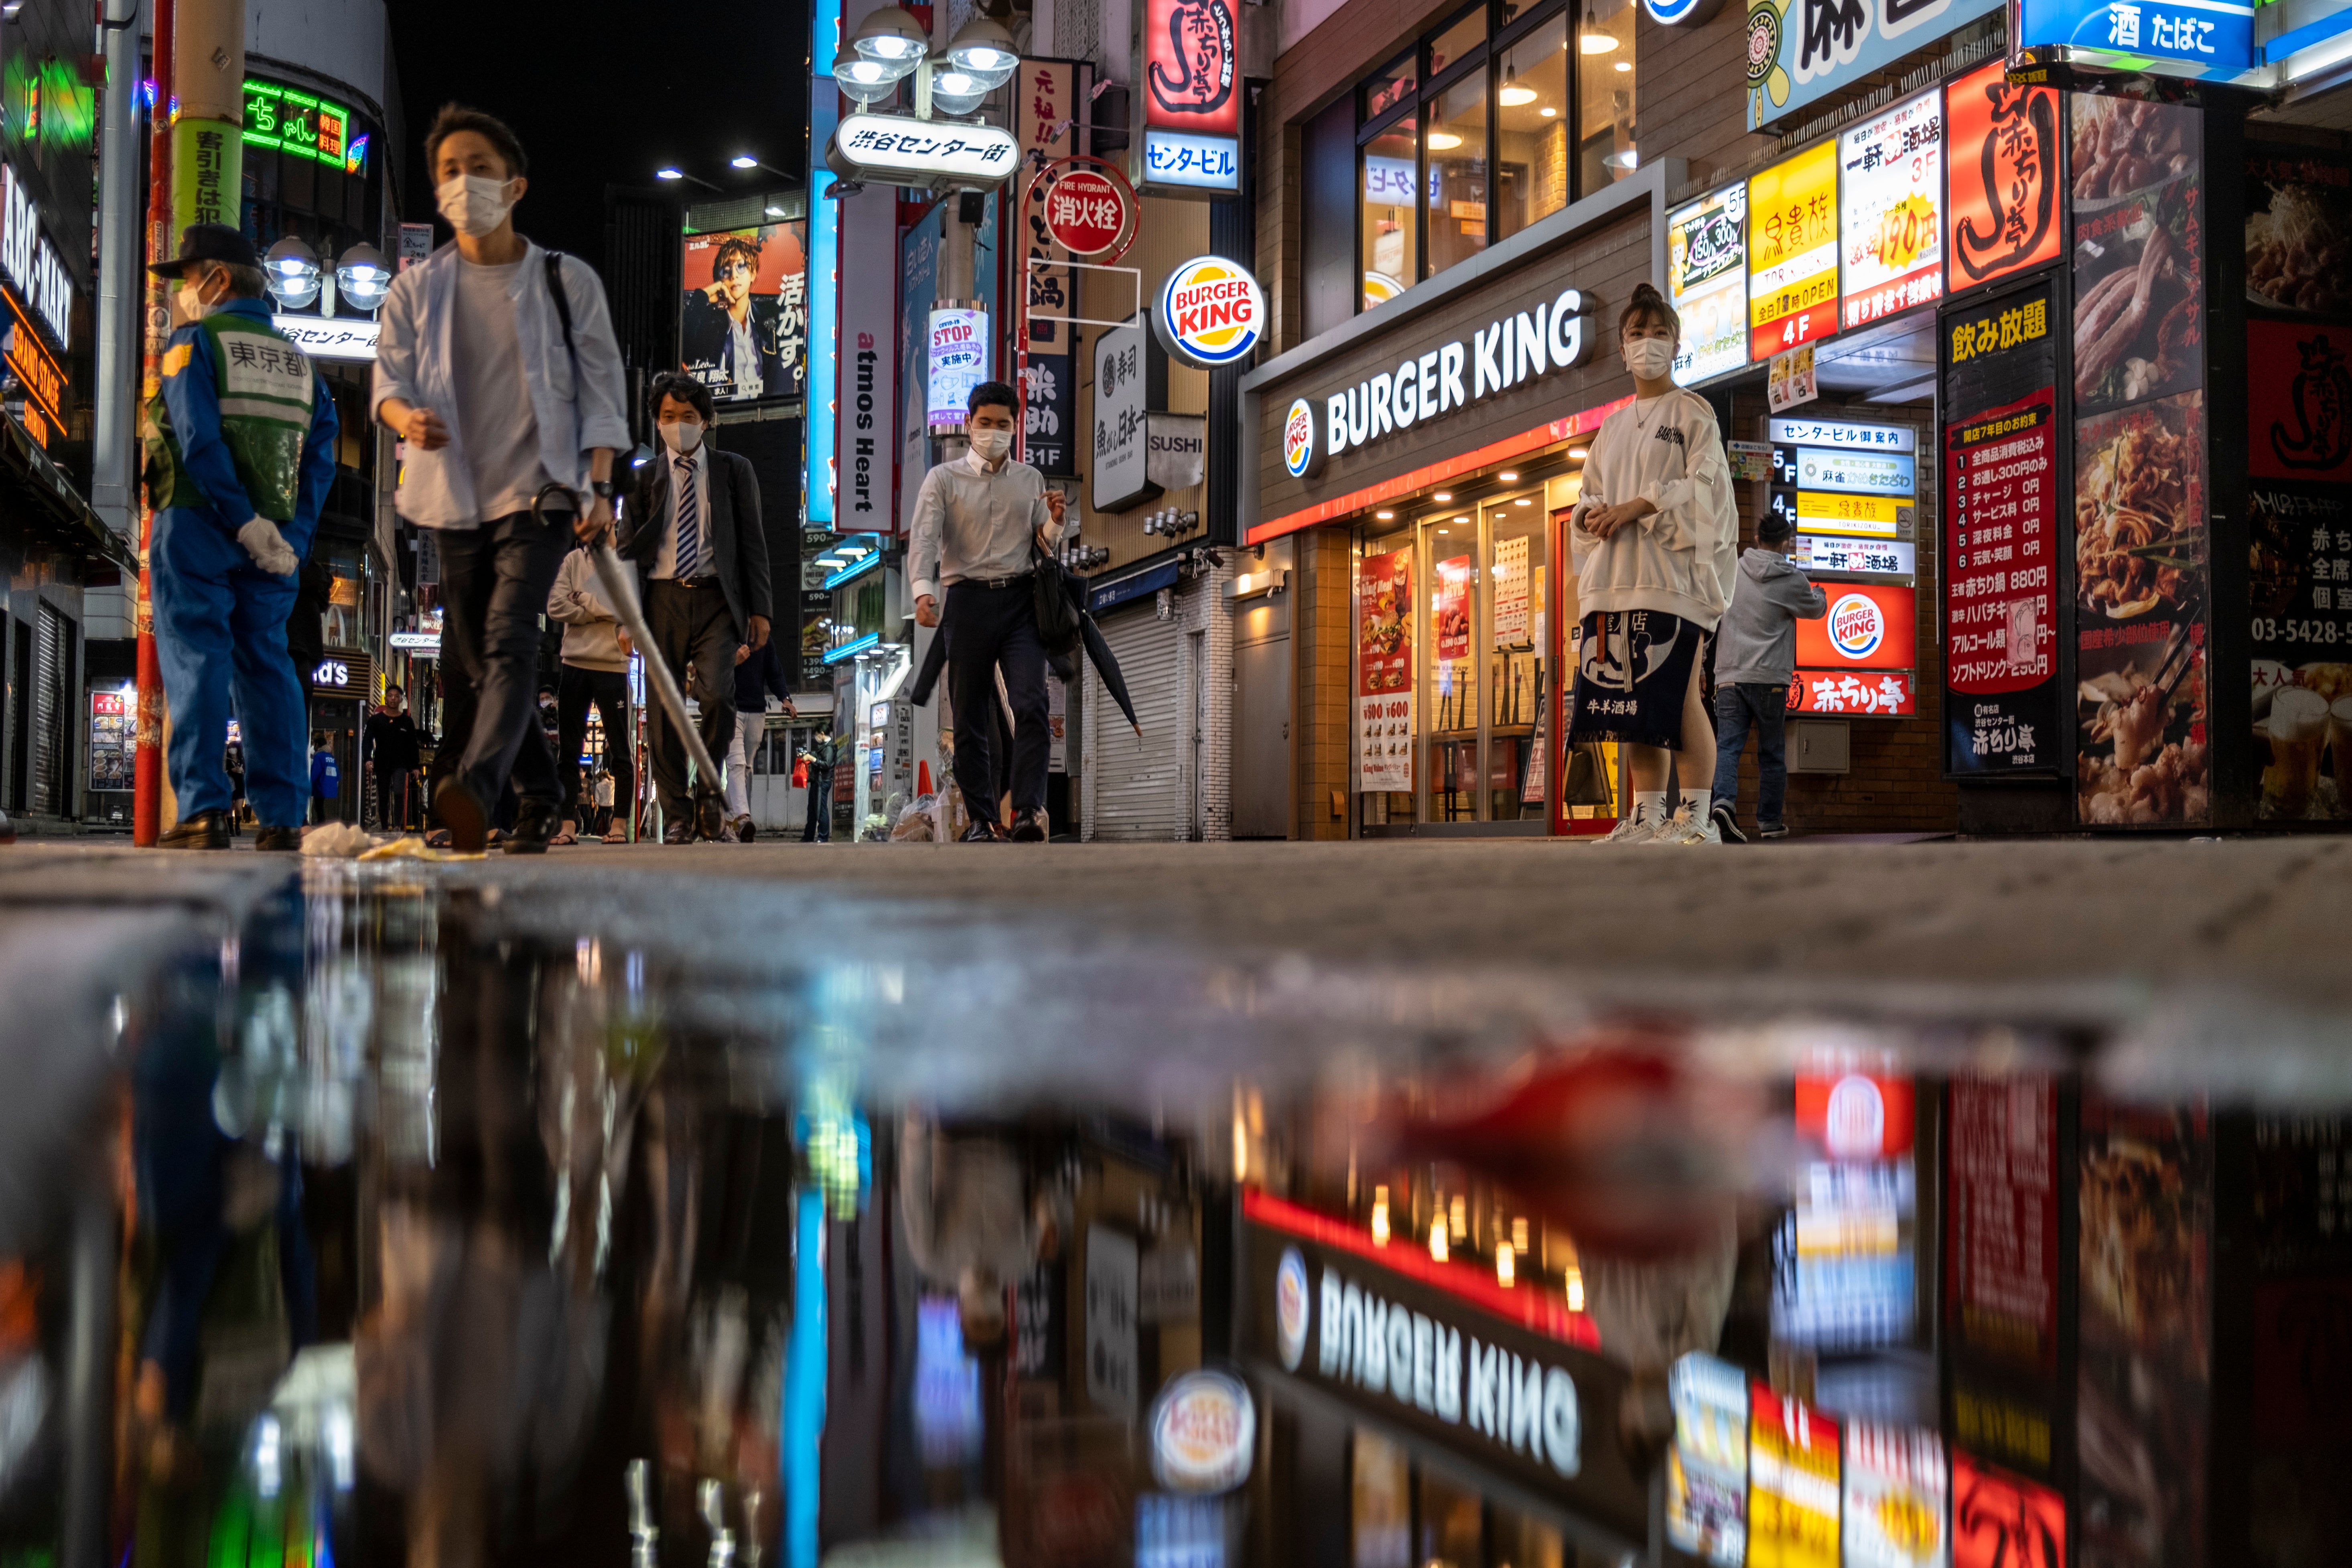 People walk along the streets full of bars and restaurants in Shibuya, an entertainment district of Tokyo (stock image)